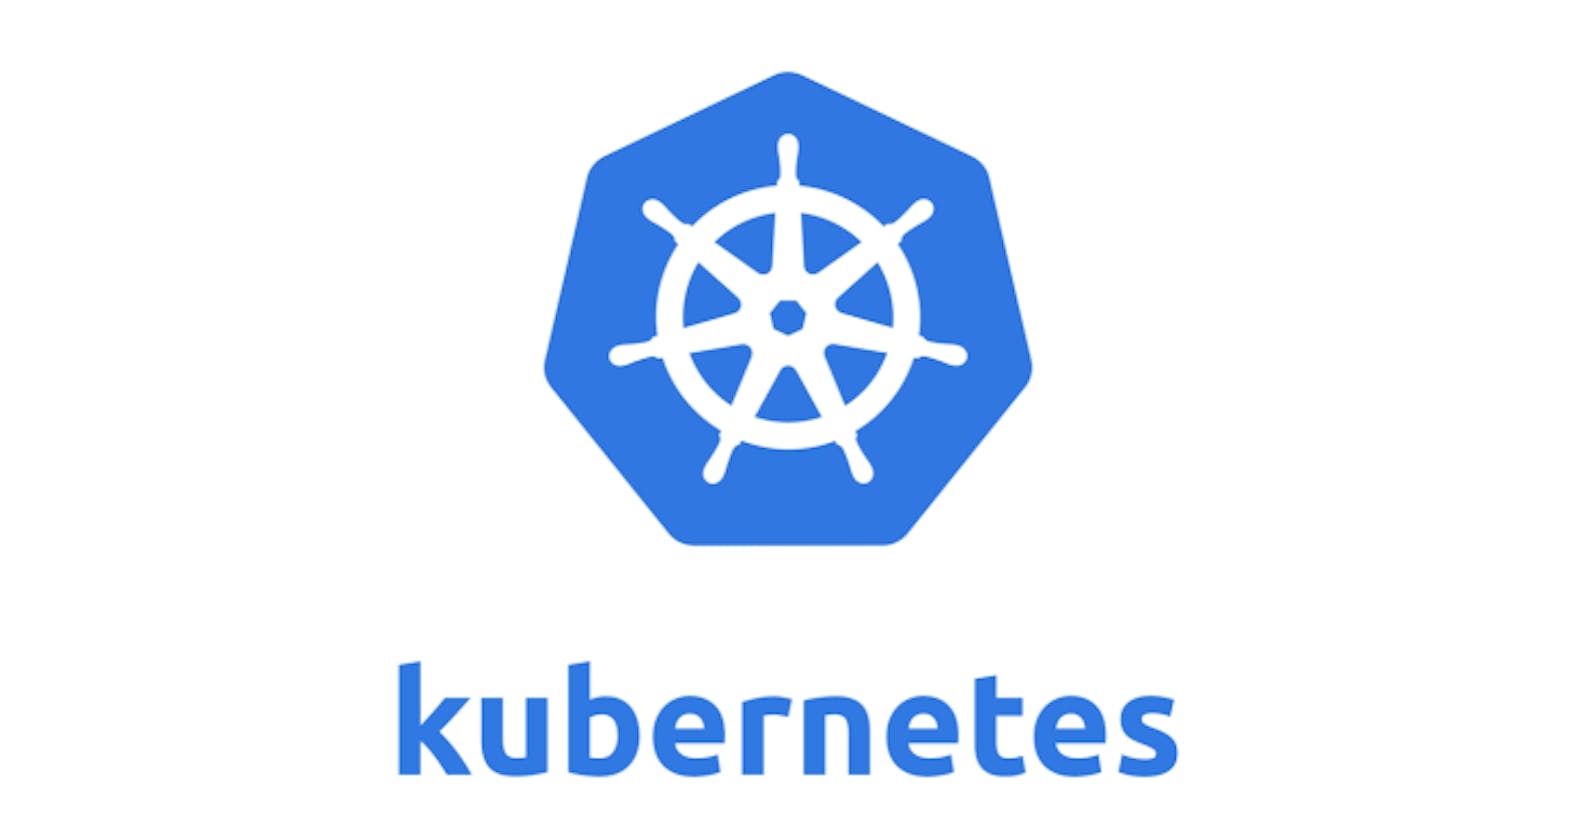 All Aboard the Kubernetes Train! 🚂